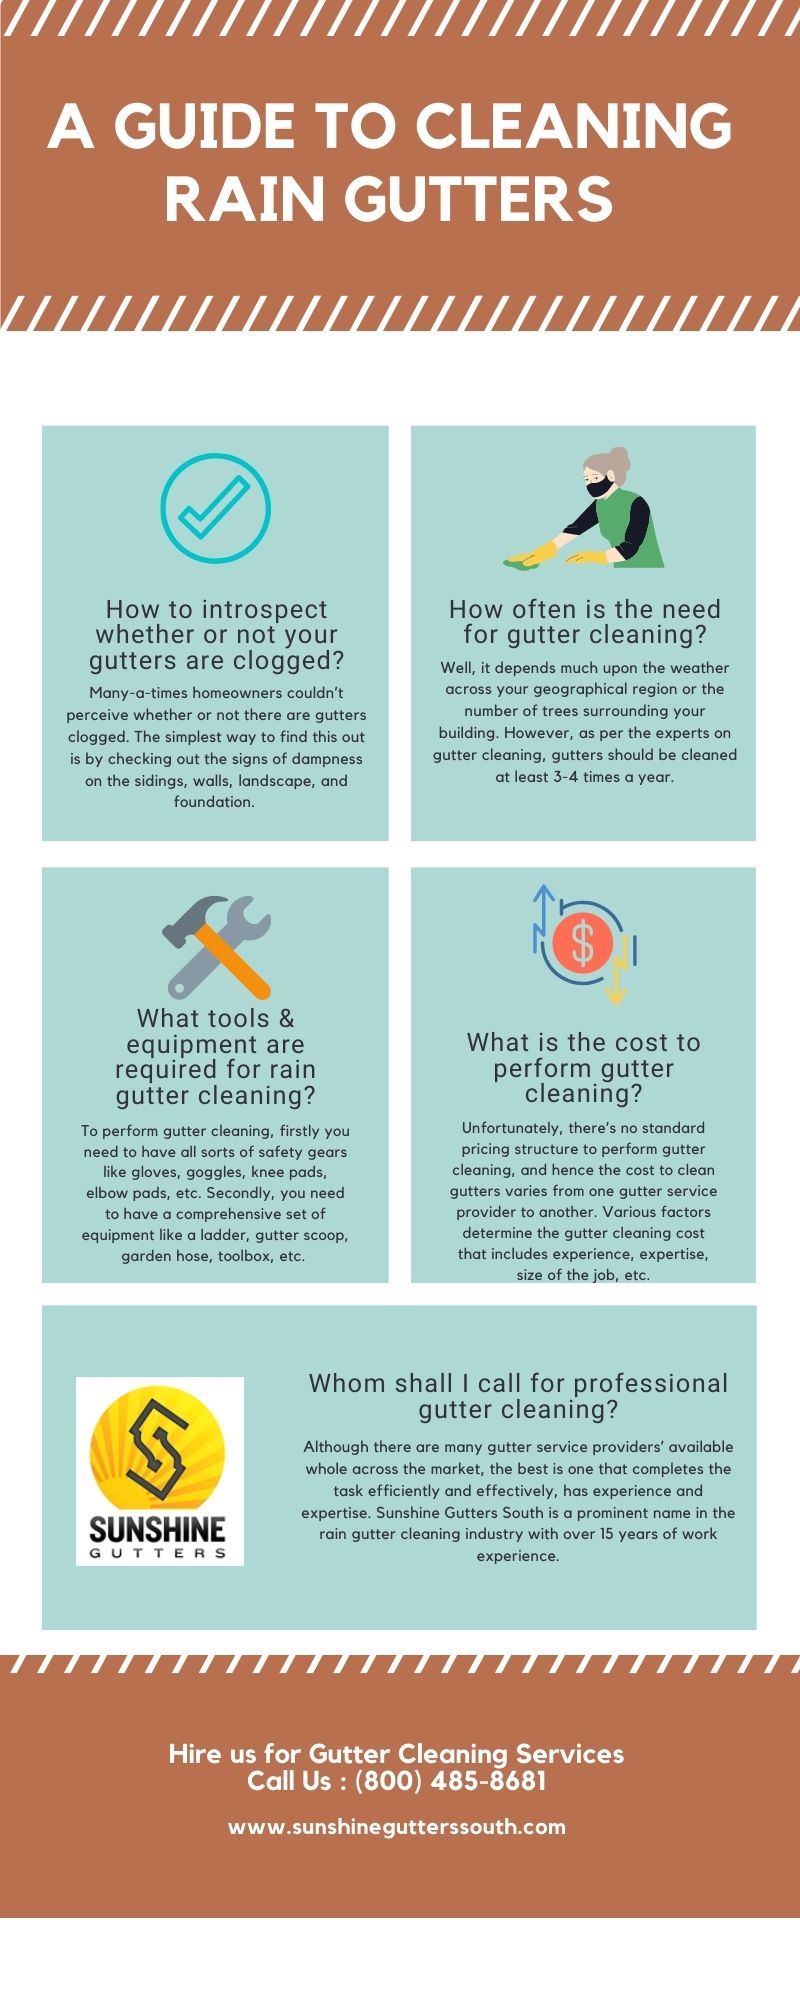 A GUIDE TO CLEANING RAIN GUTTERS